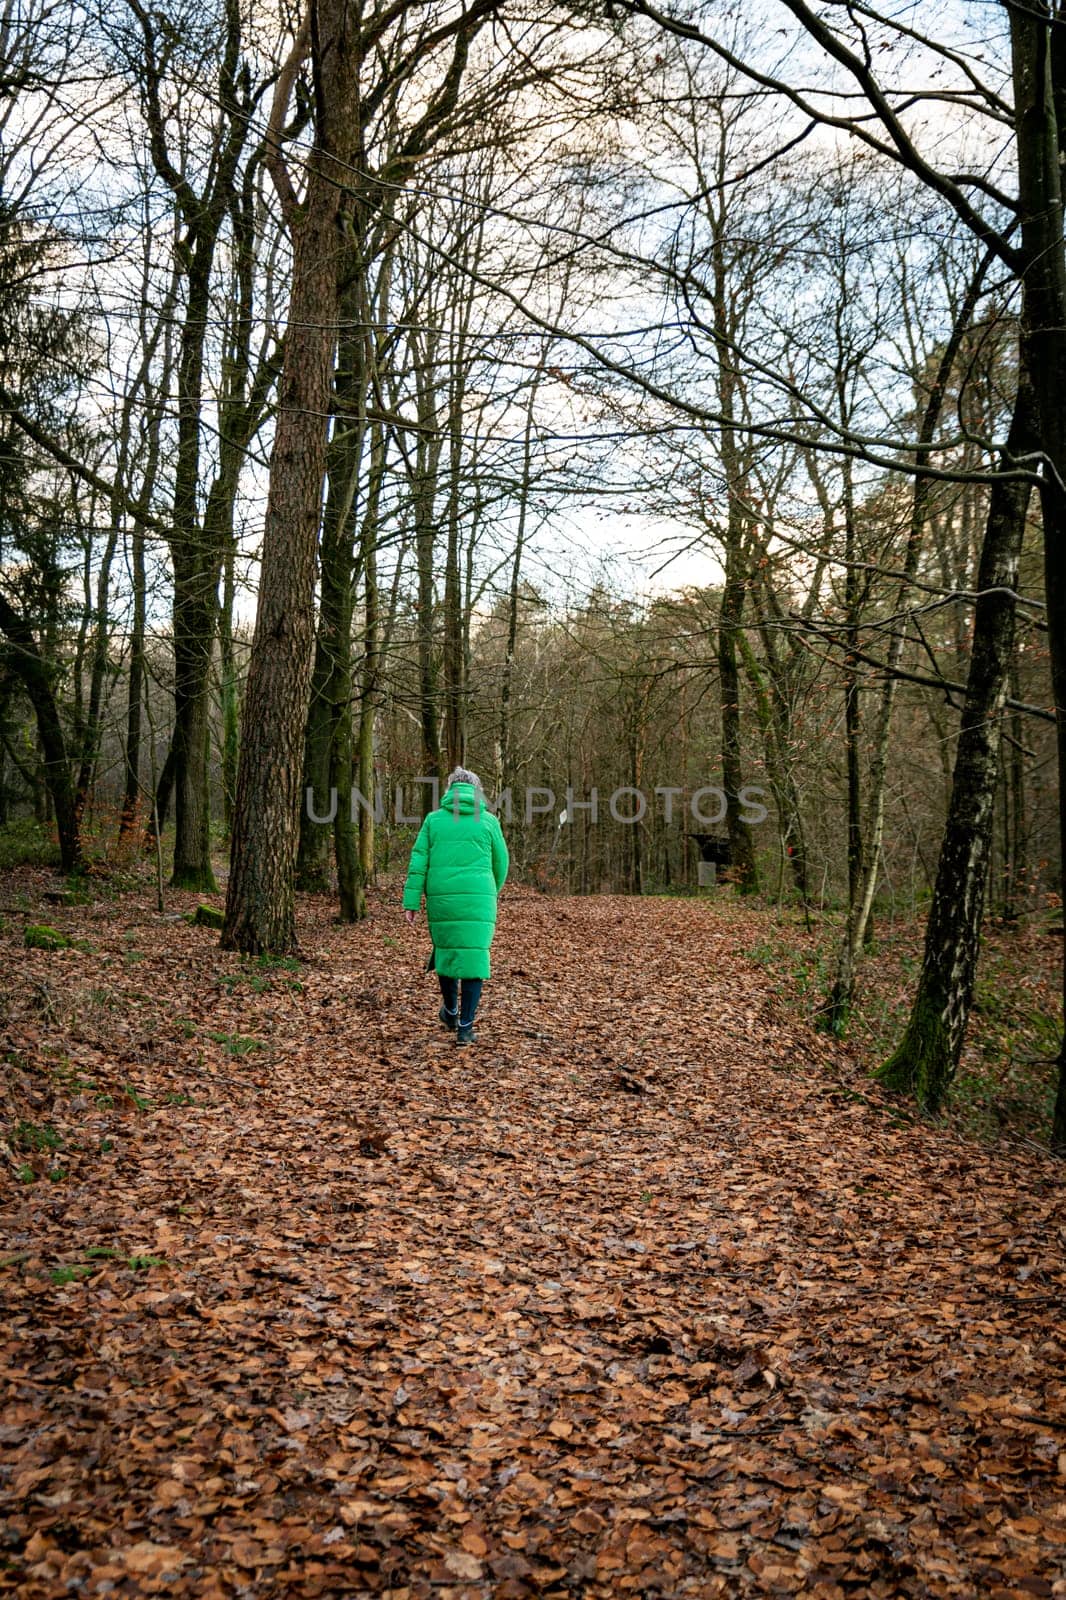 an adult woman with gray hair in a light green long coat walks through the forest on a leaf on a path full of autumn leaves between the trees..